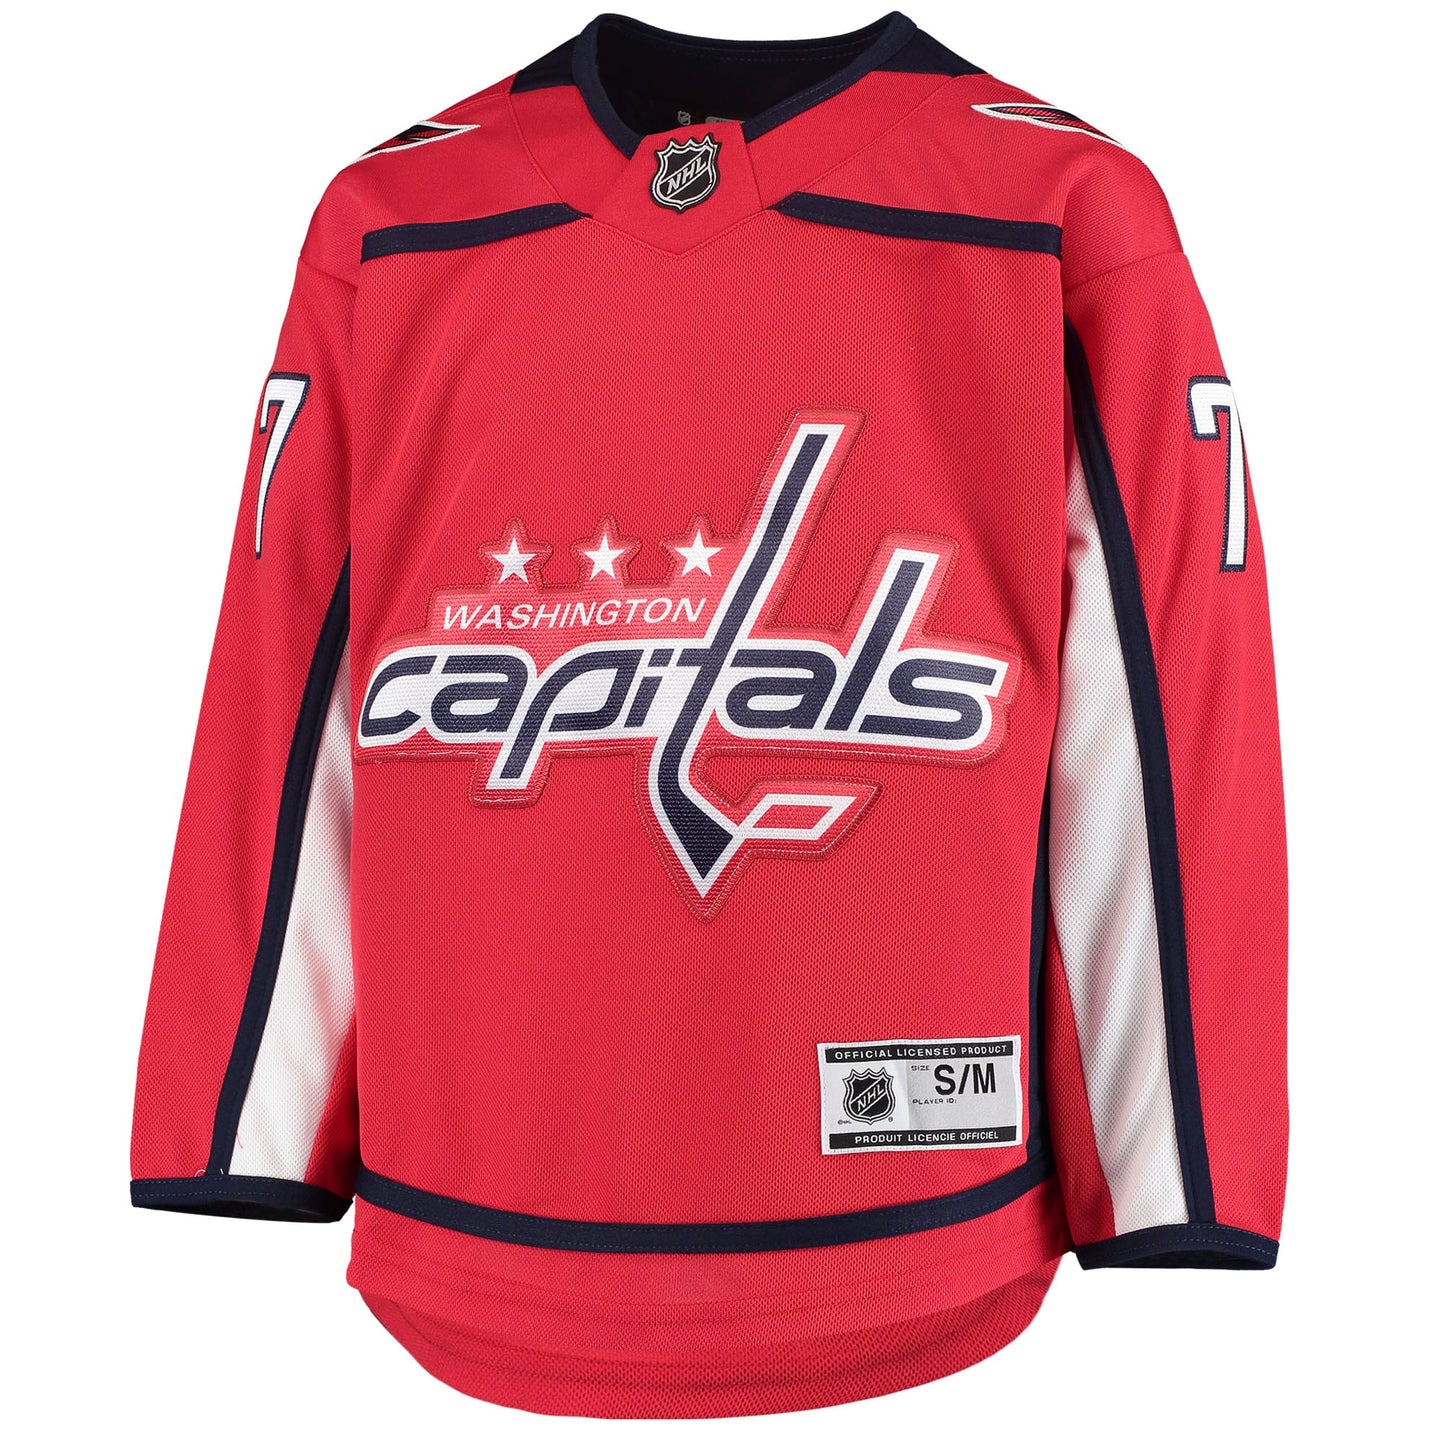 TJ Oshie Washington Capitals Youth Home Premier Player Jersey - Red